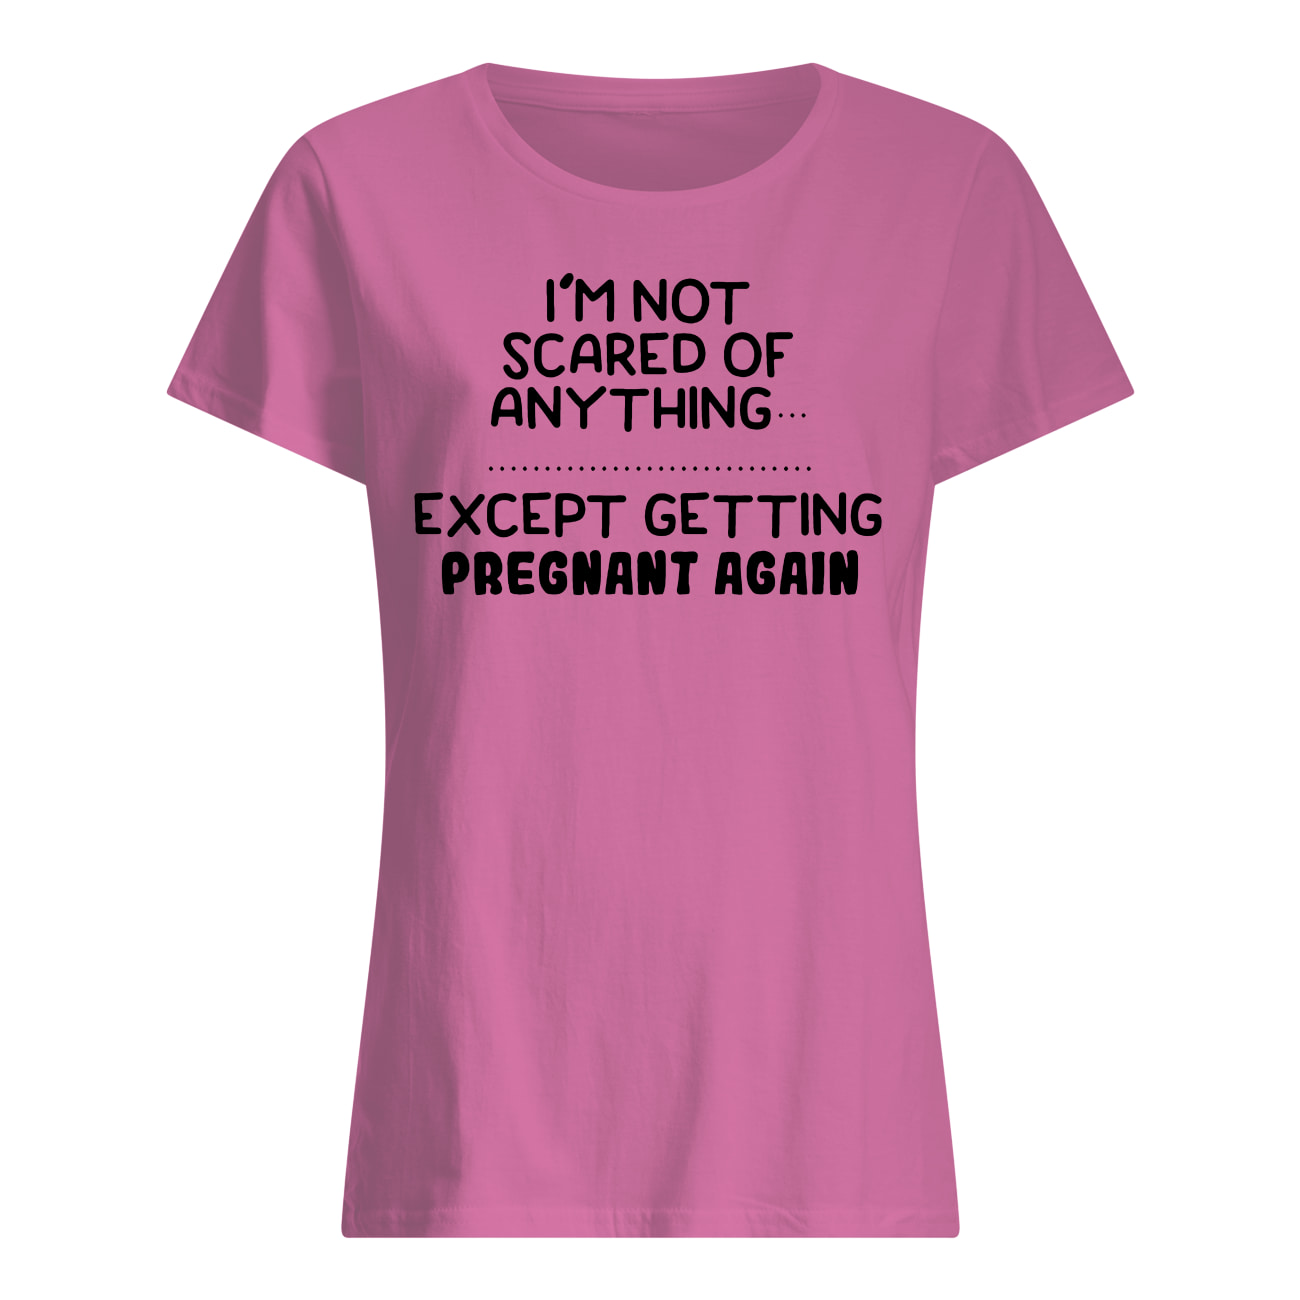 I'm not scared of anything except getting pregnant again womens shirt